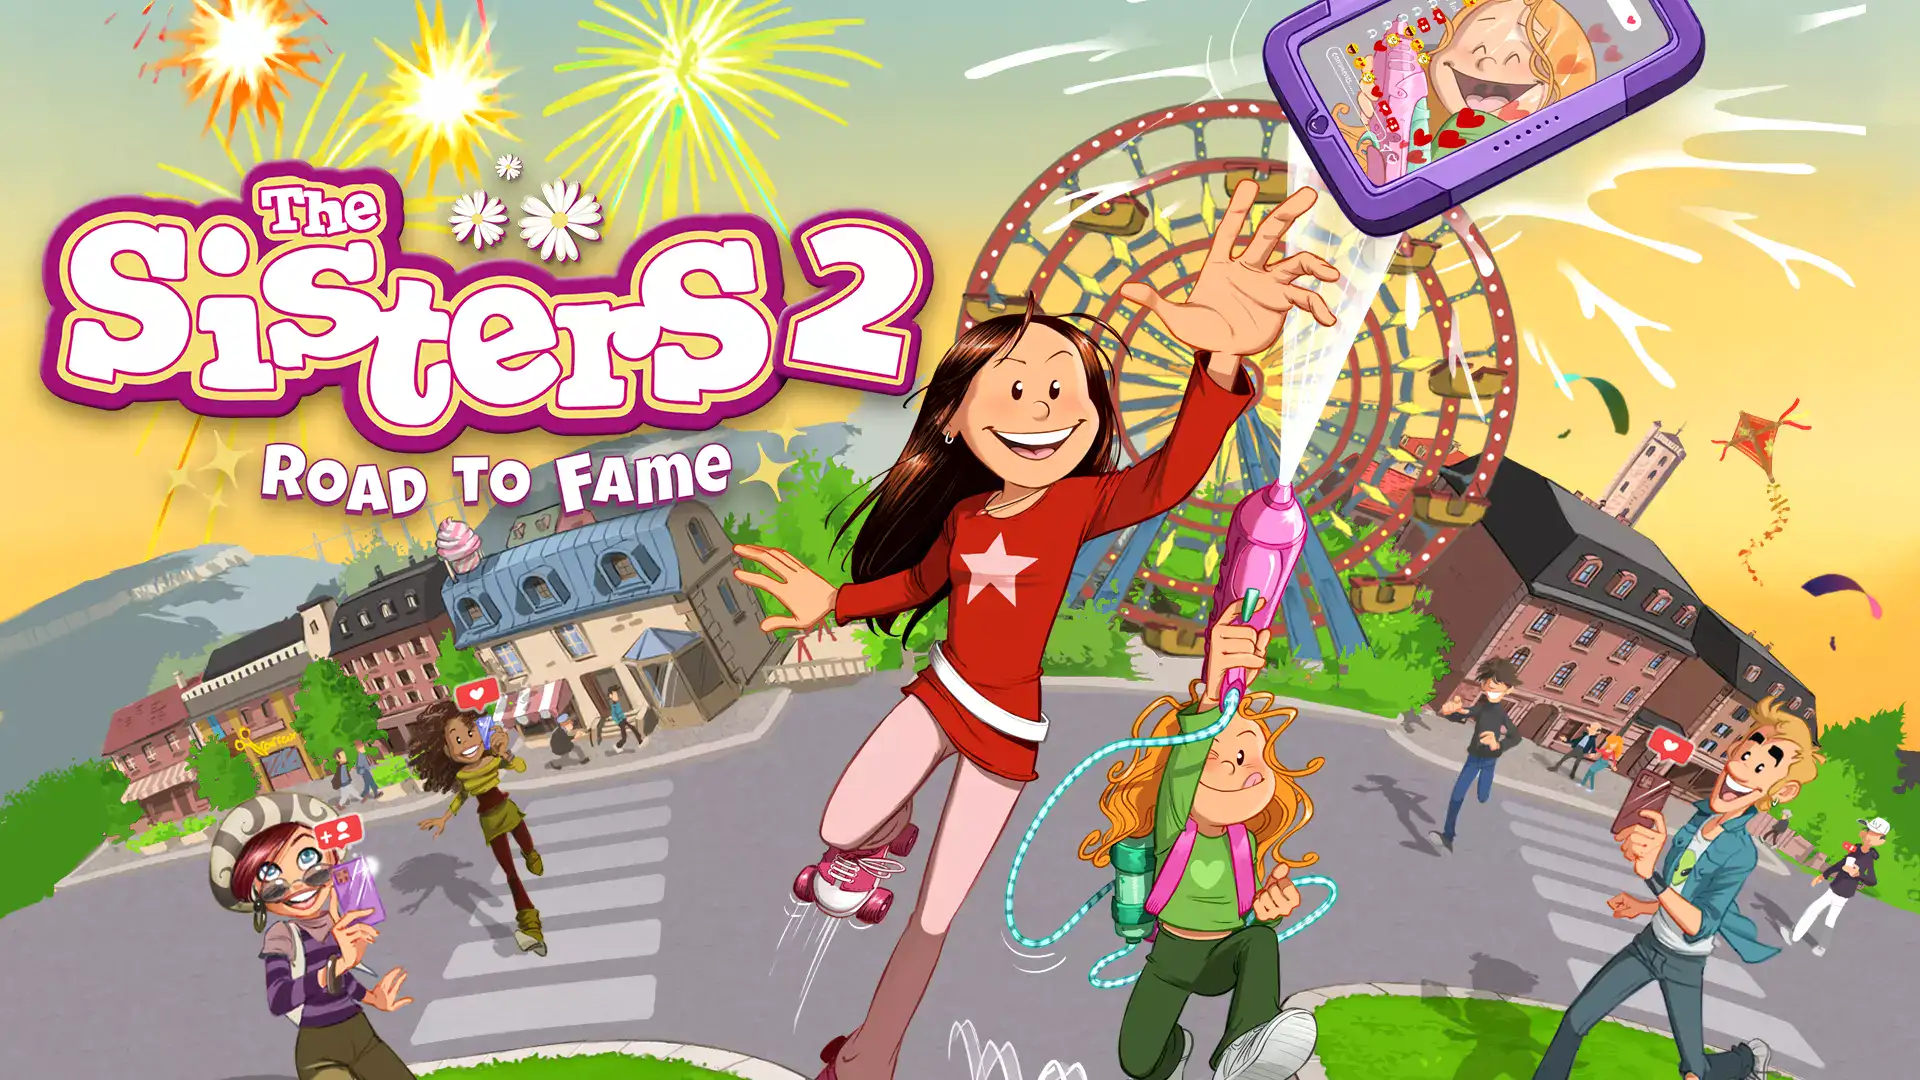 Microids i Meridiem anuncien The Sisters 2: Road to Fame